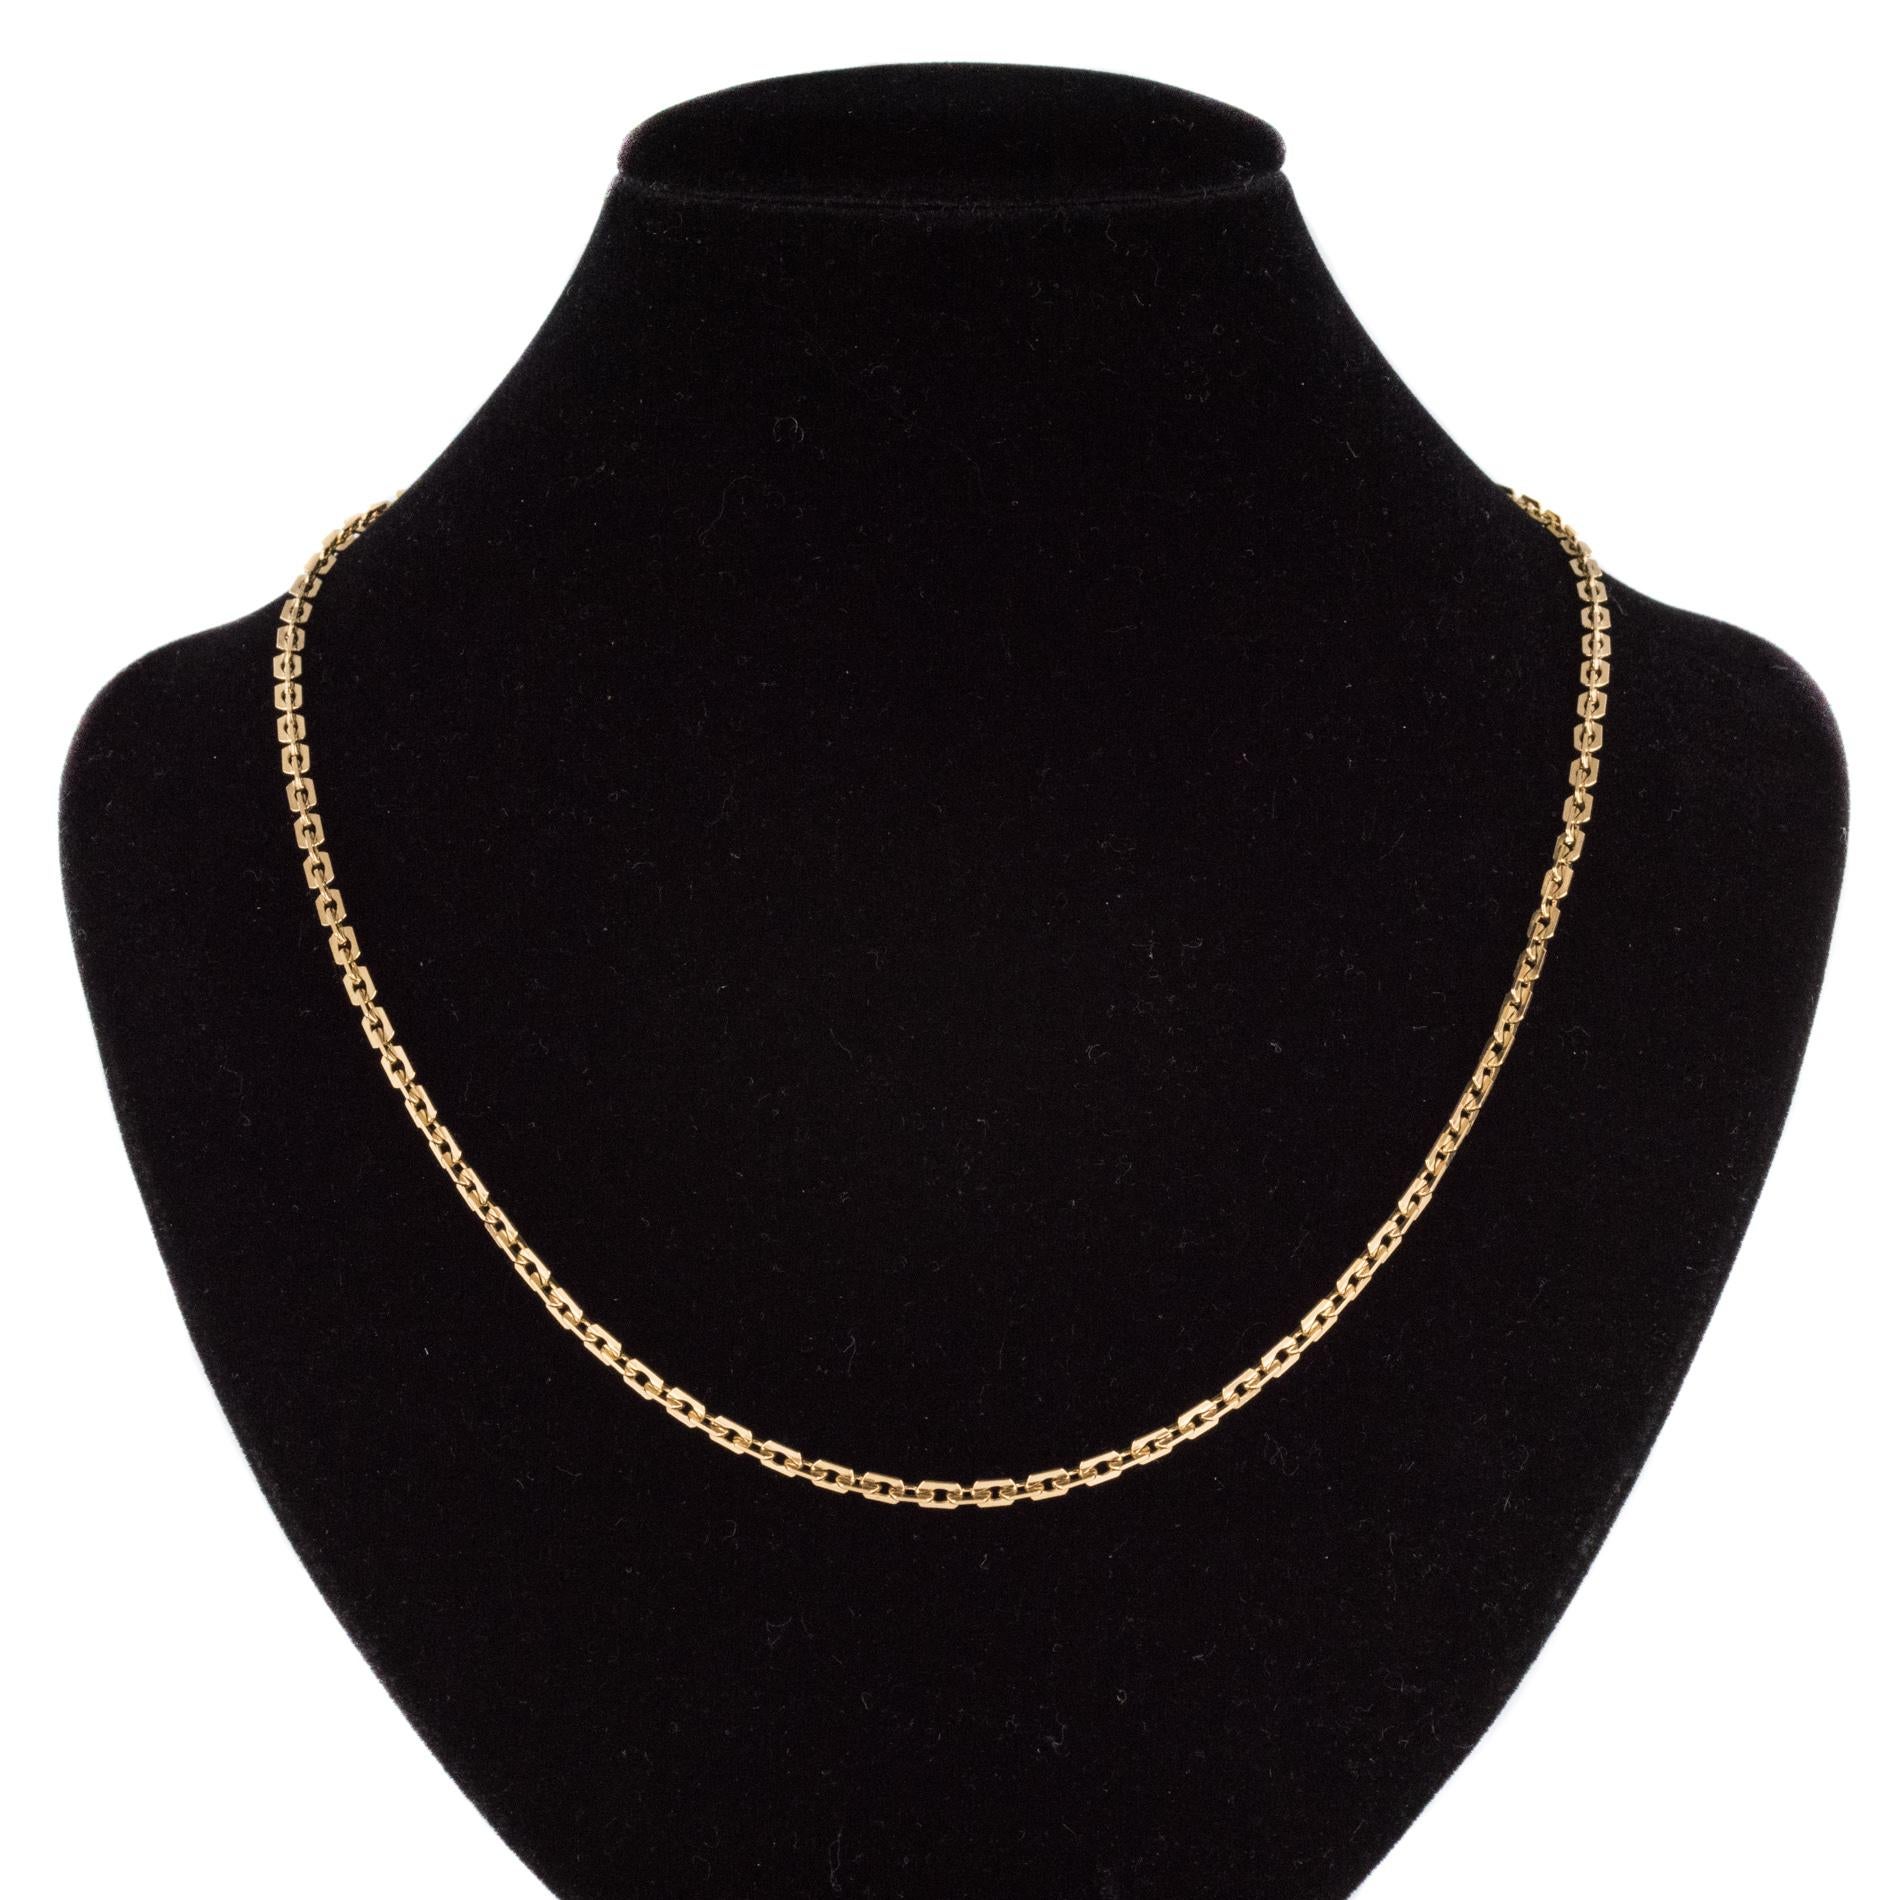 Chain in 18 karat rose gold, eagle's head hallmark.
Splendid retro chain, it is composed of a convict mesh. The fastener is a spring ring with safety chain.
Length: 61.5 cm, thickness: 2.7 mm.
Total weight of the jewel: about 14.7 g.
Authentic